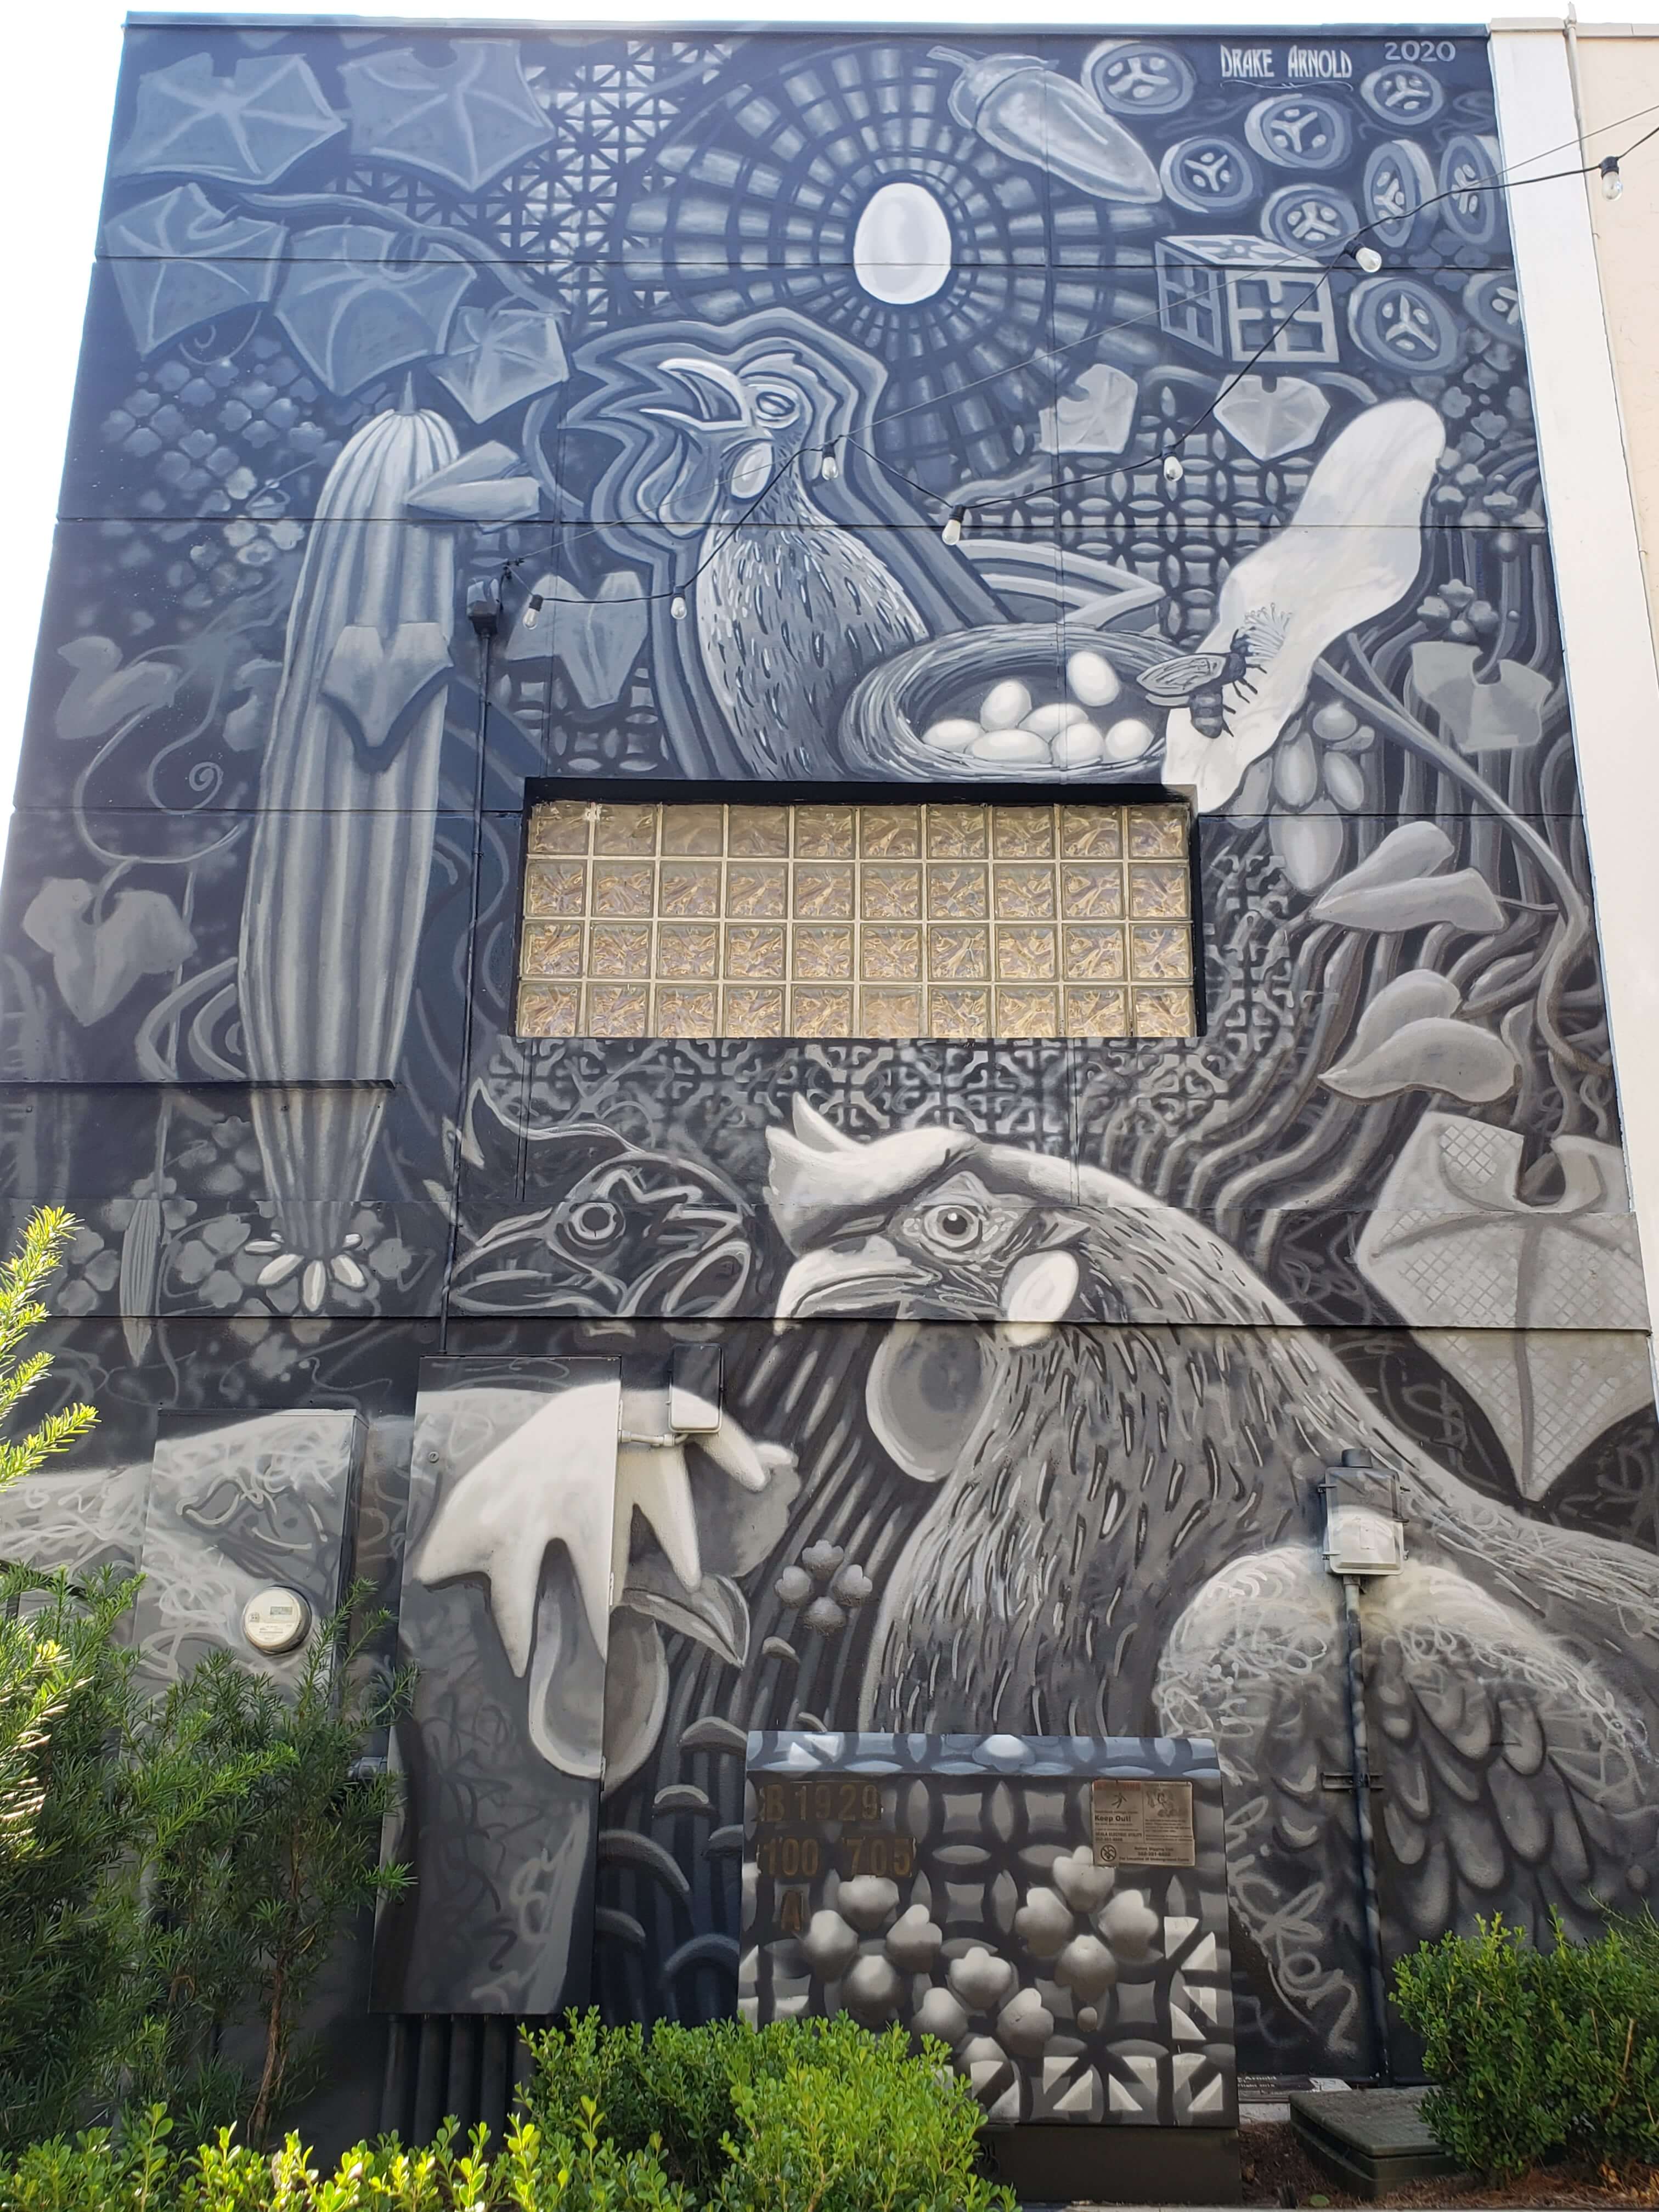 Mural by Drake Arnold at the Marion Cultural Alliance